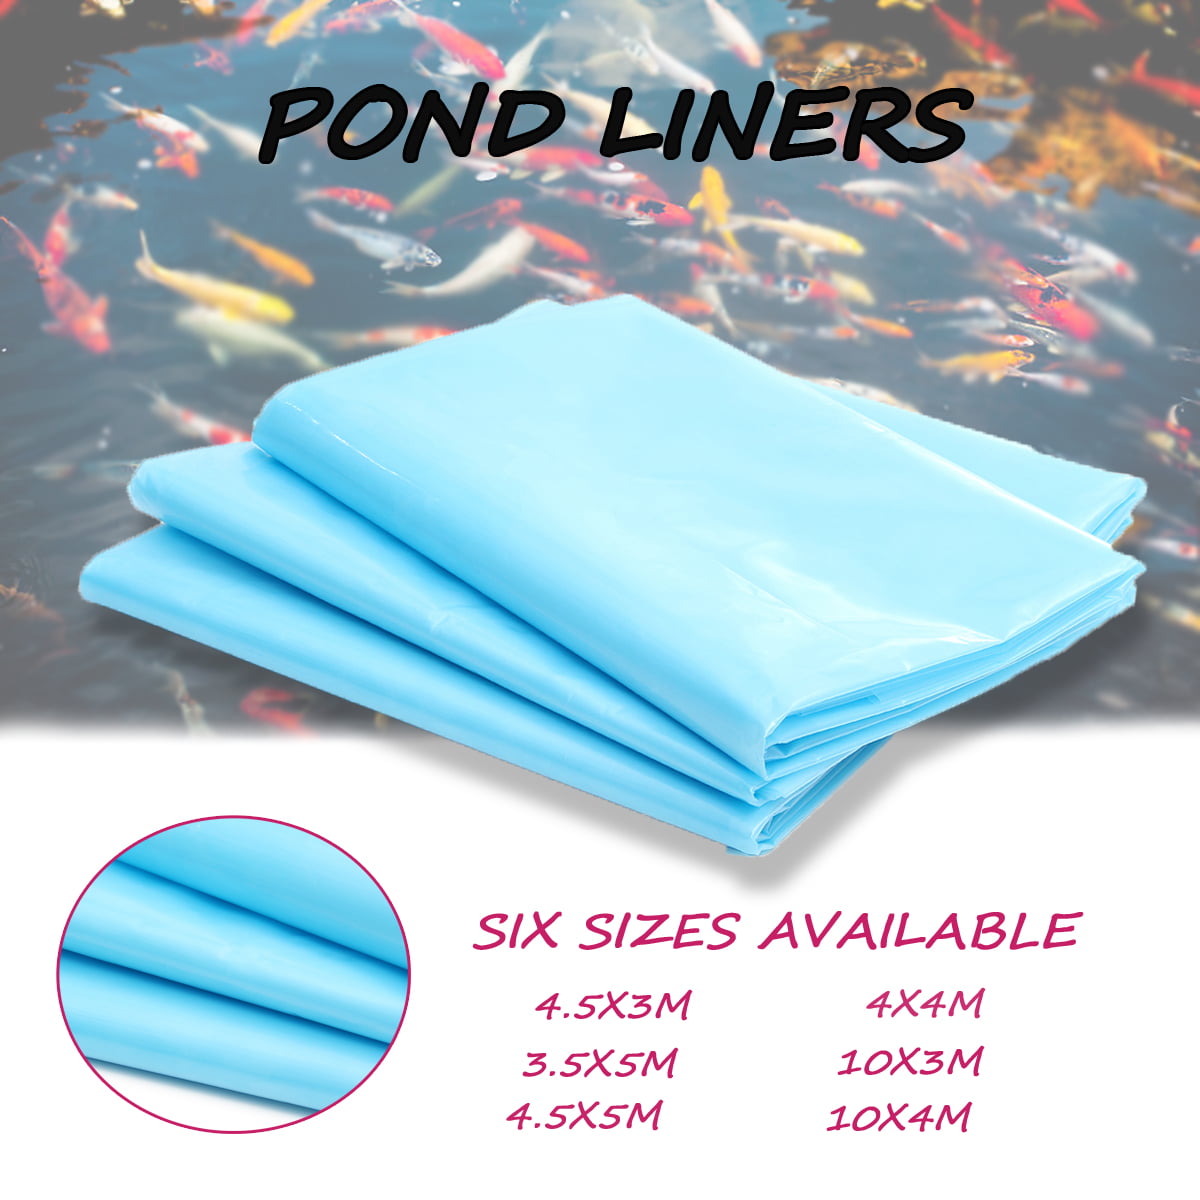 Details about   20Mil Large 15x10ft Pool Pond Liner Durable HDPE Material Long lifespan Quality 